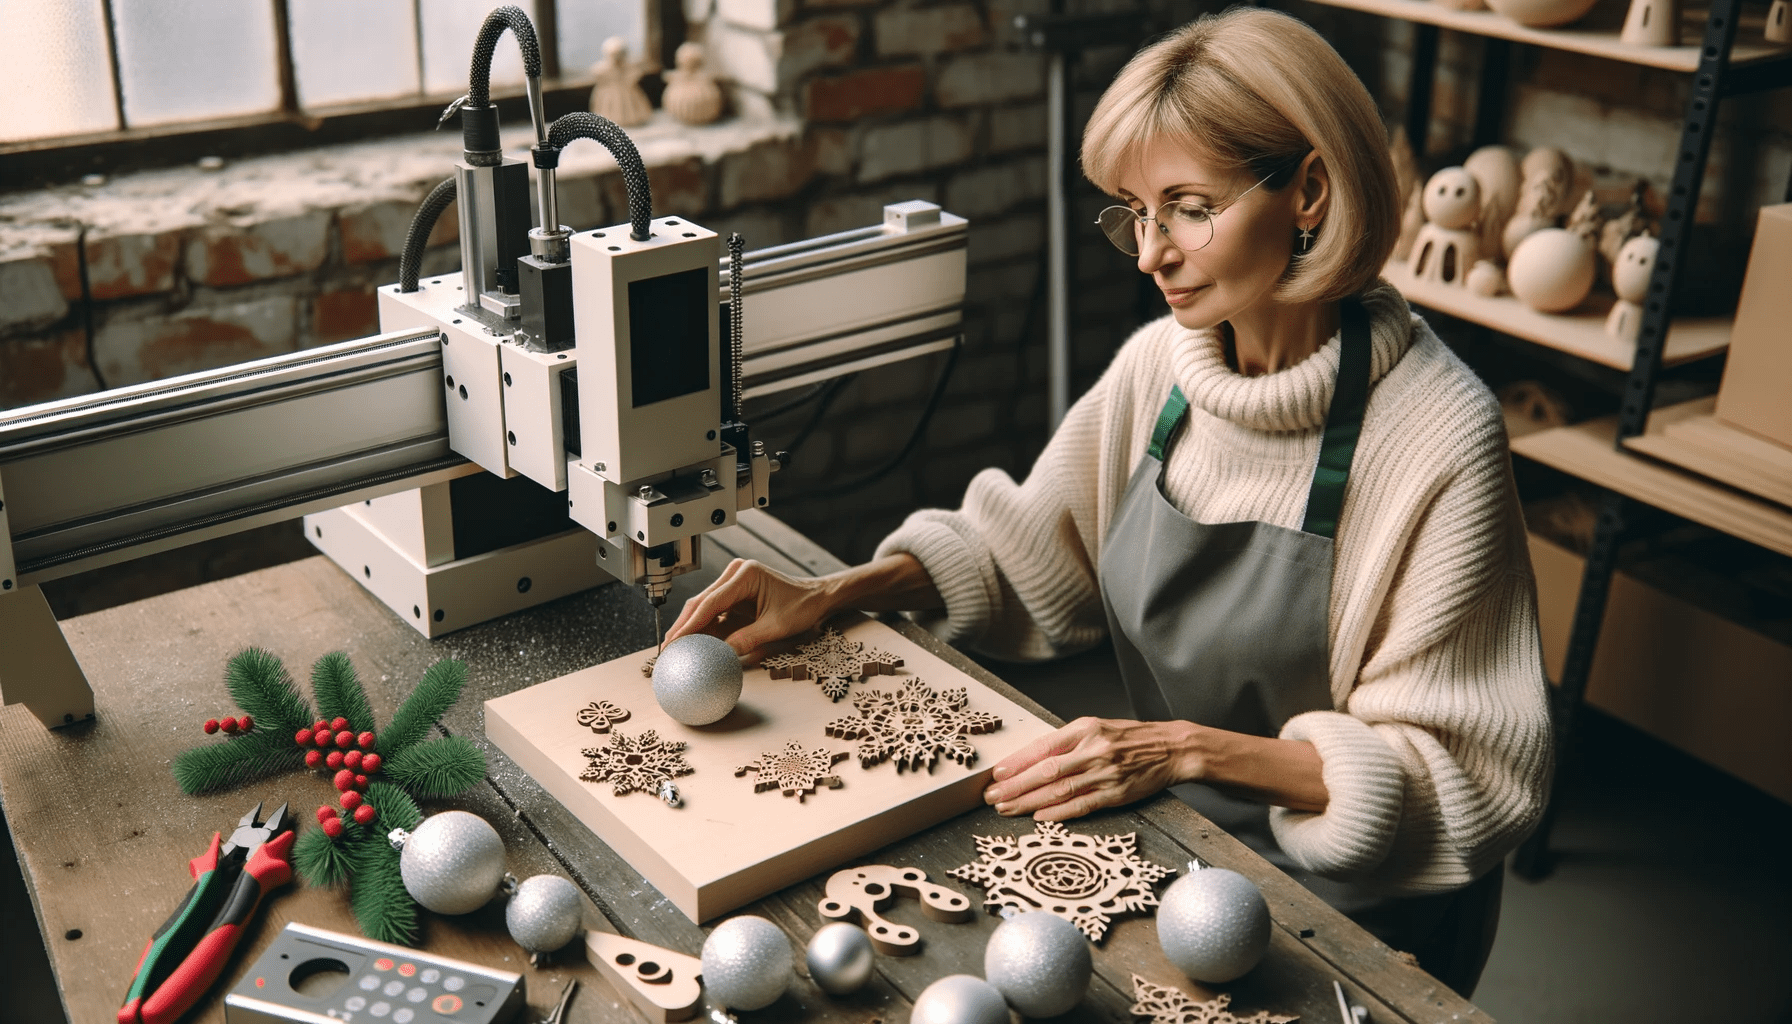 Middle-aged woman in a workspace, meticulously creating Christmas ornaments with a different type of CNC machine. The setting is filled wit